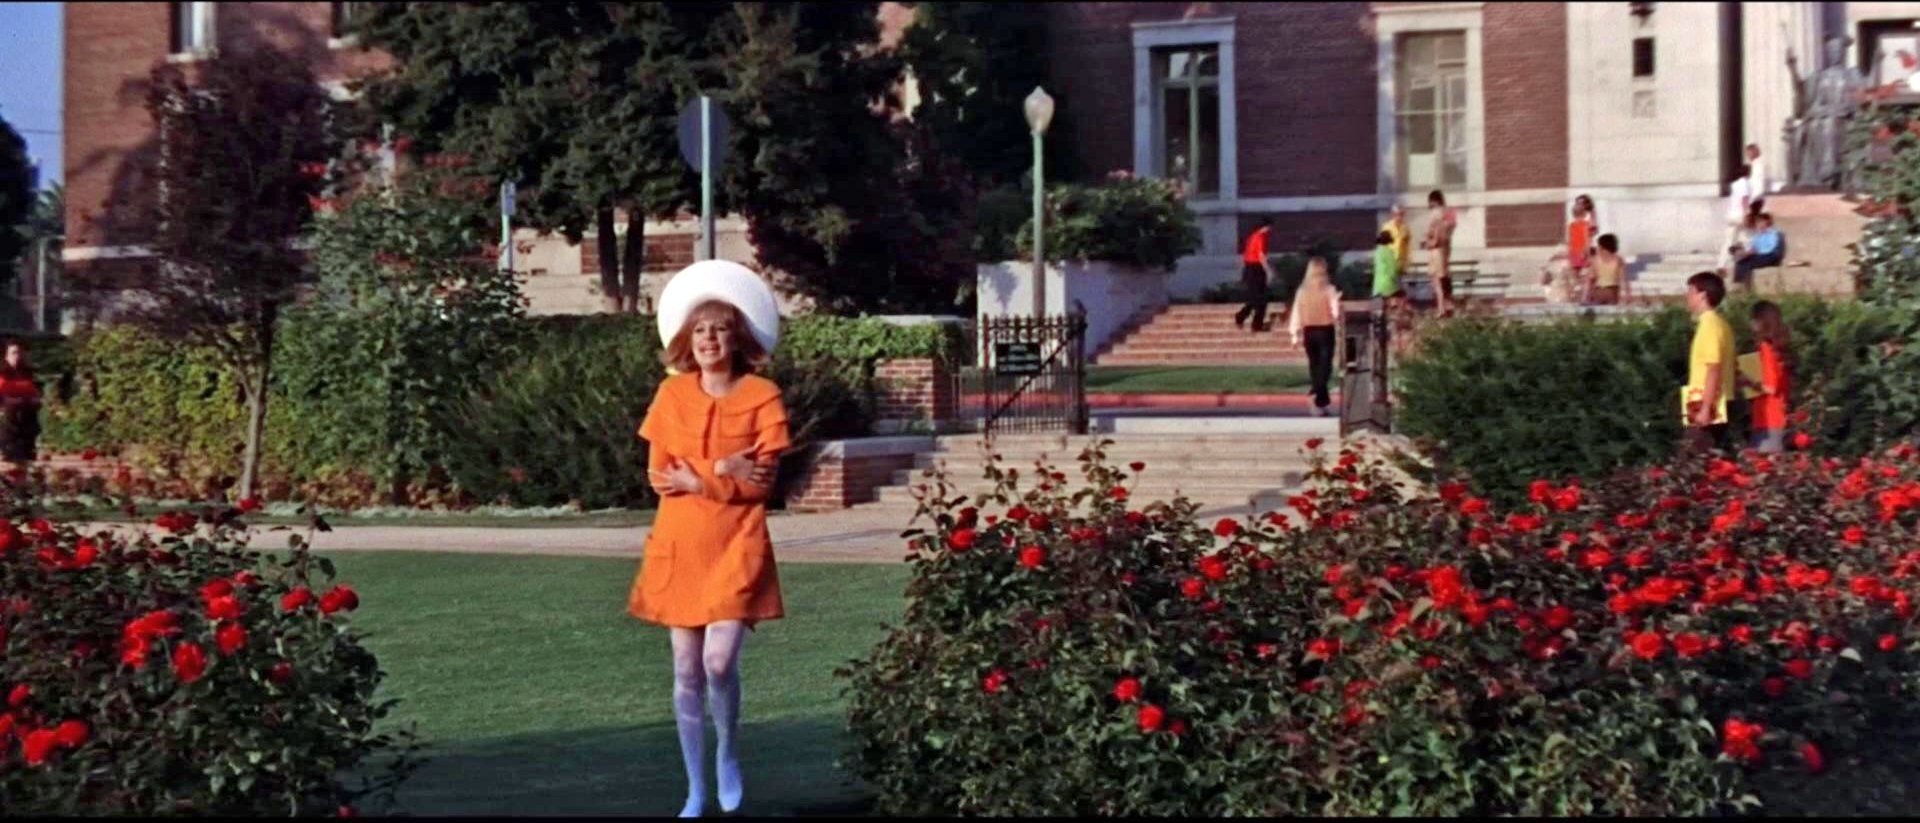 Exposition Park Rose Garden, Los Angeles, as it stands in for the University in the movie.